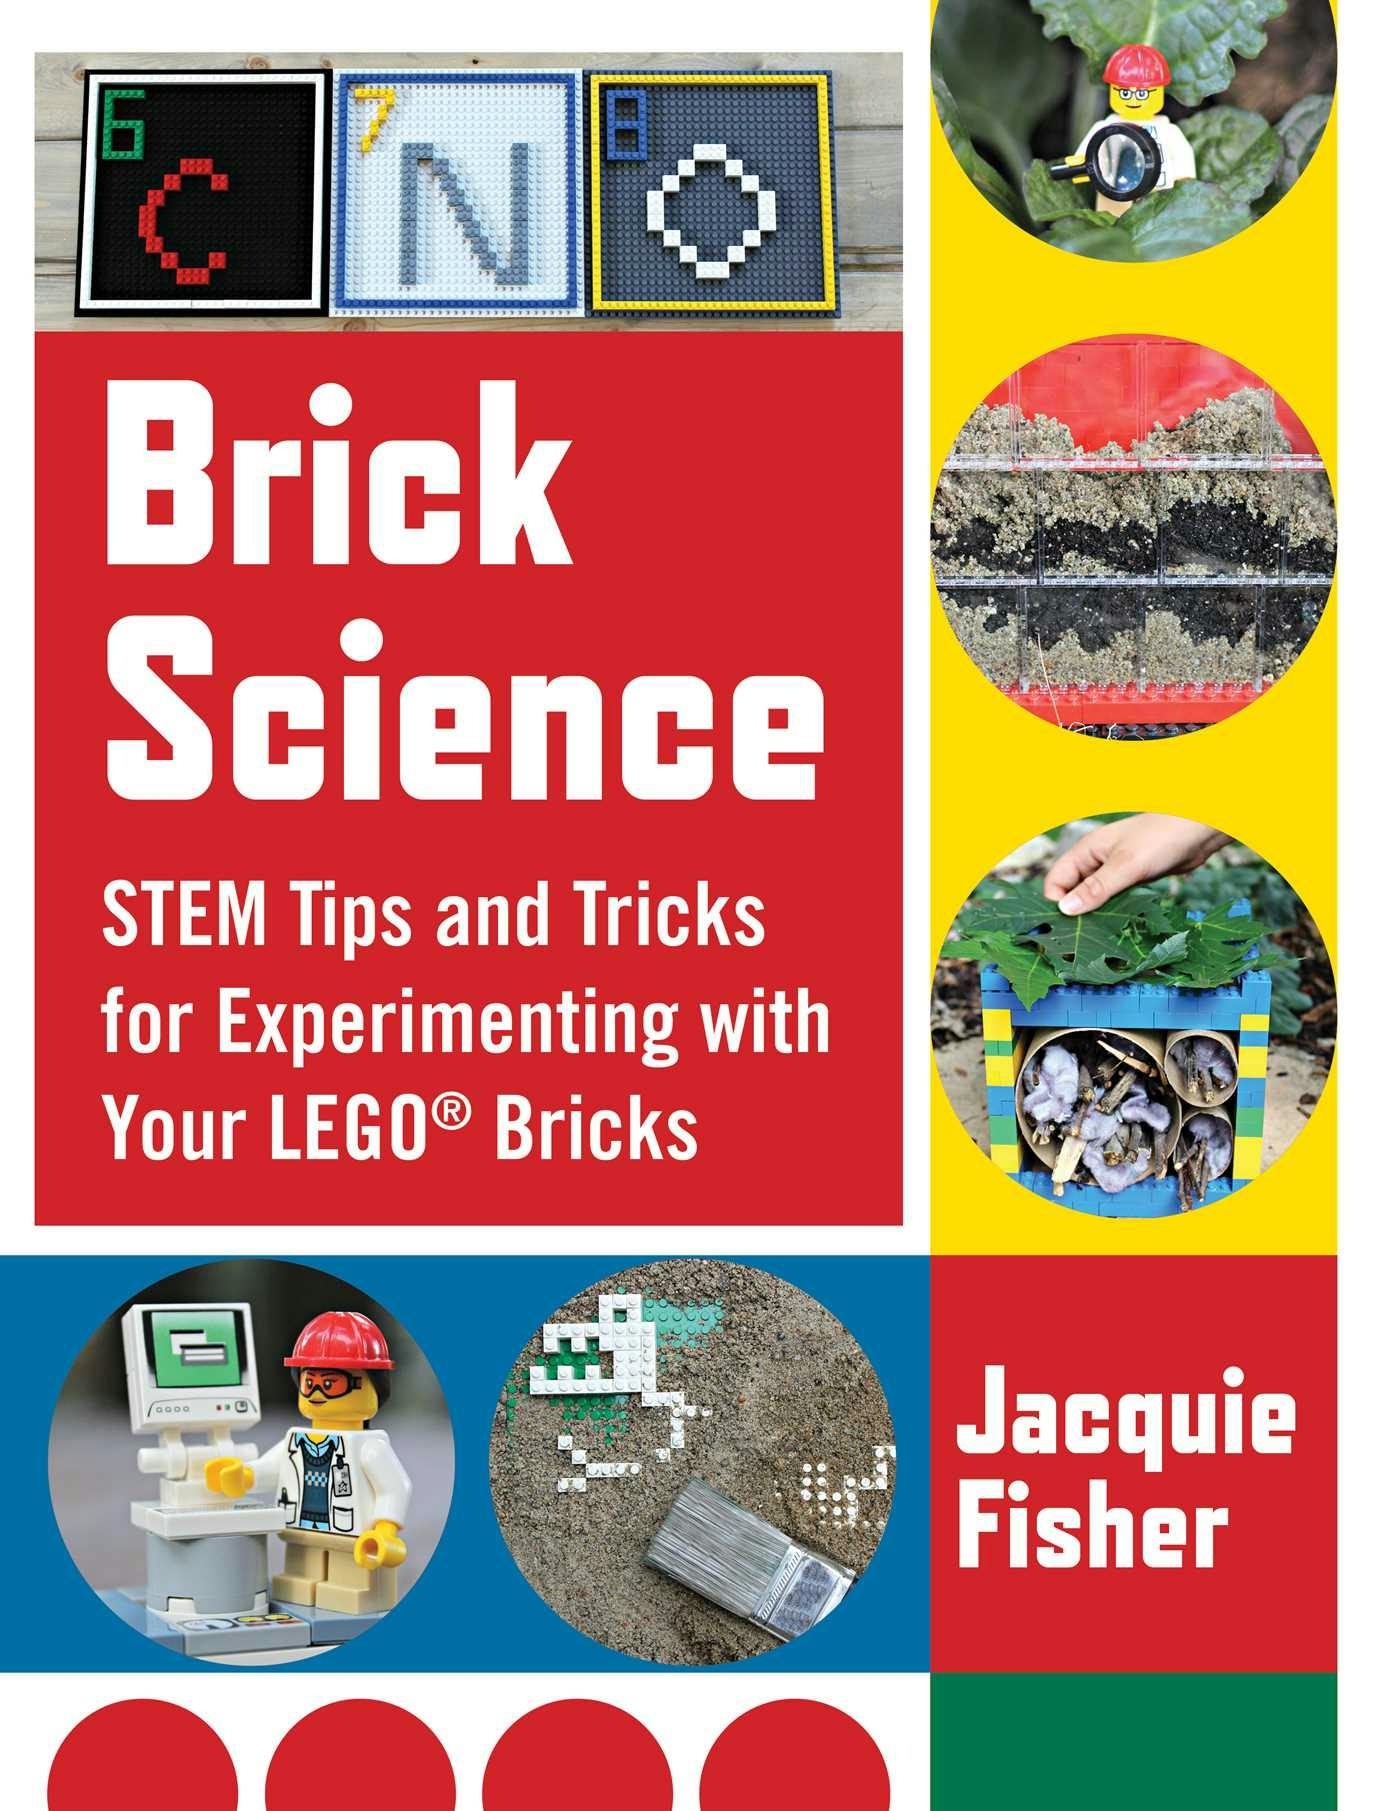 Brick Science: STEM Tips and Tricks for Experimenting with Your LEGO Bricks—30 Fun Projects for Kids! - Jacquie Fisher